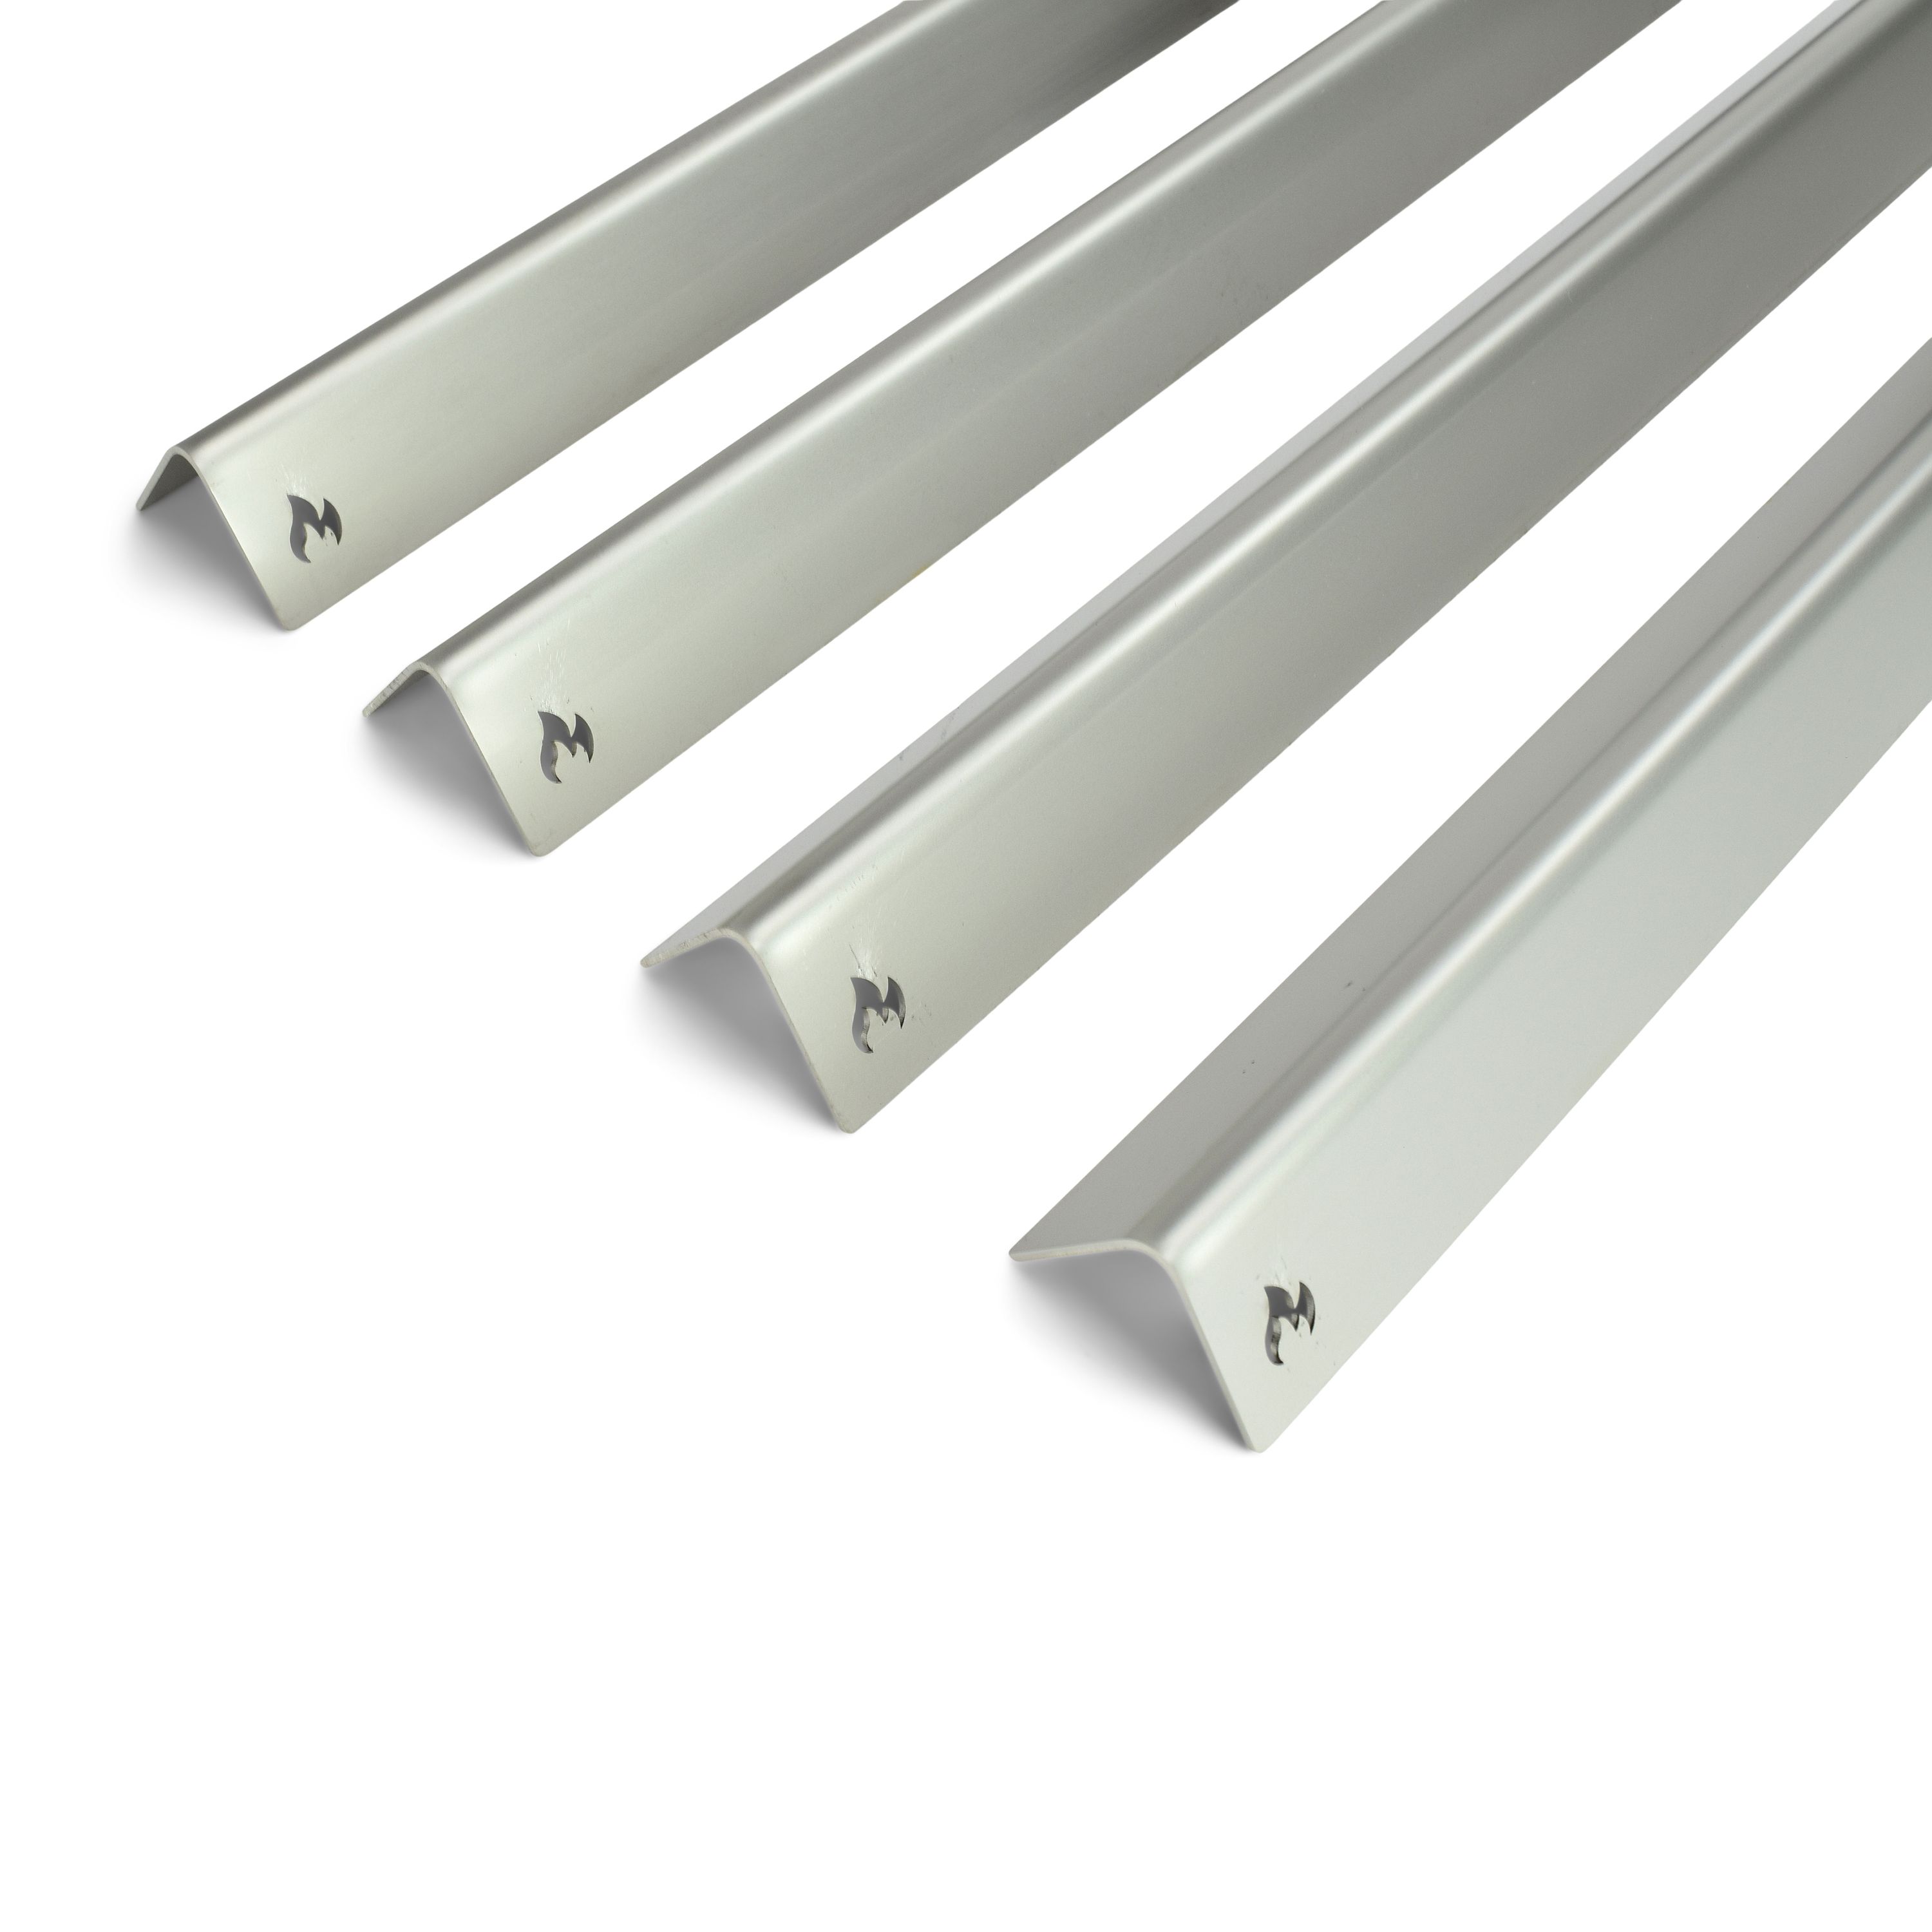 Stainless steel aroma rails for Weber Burner cover for Summit 470 and 670 series